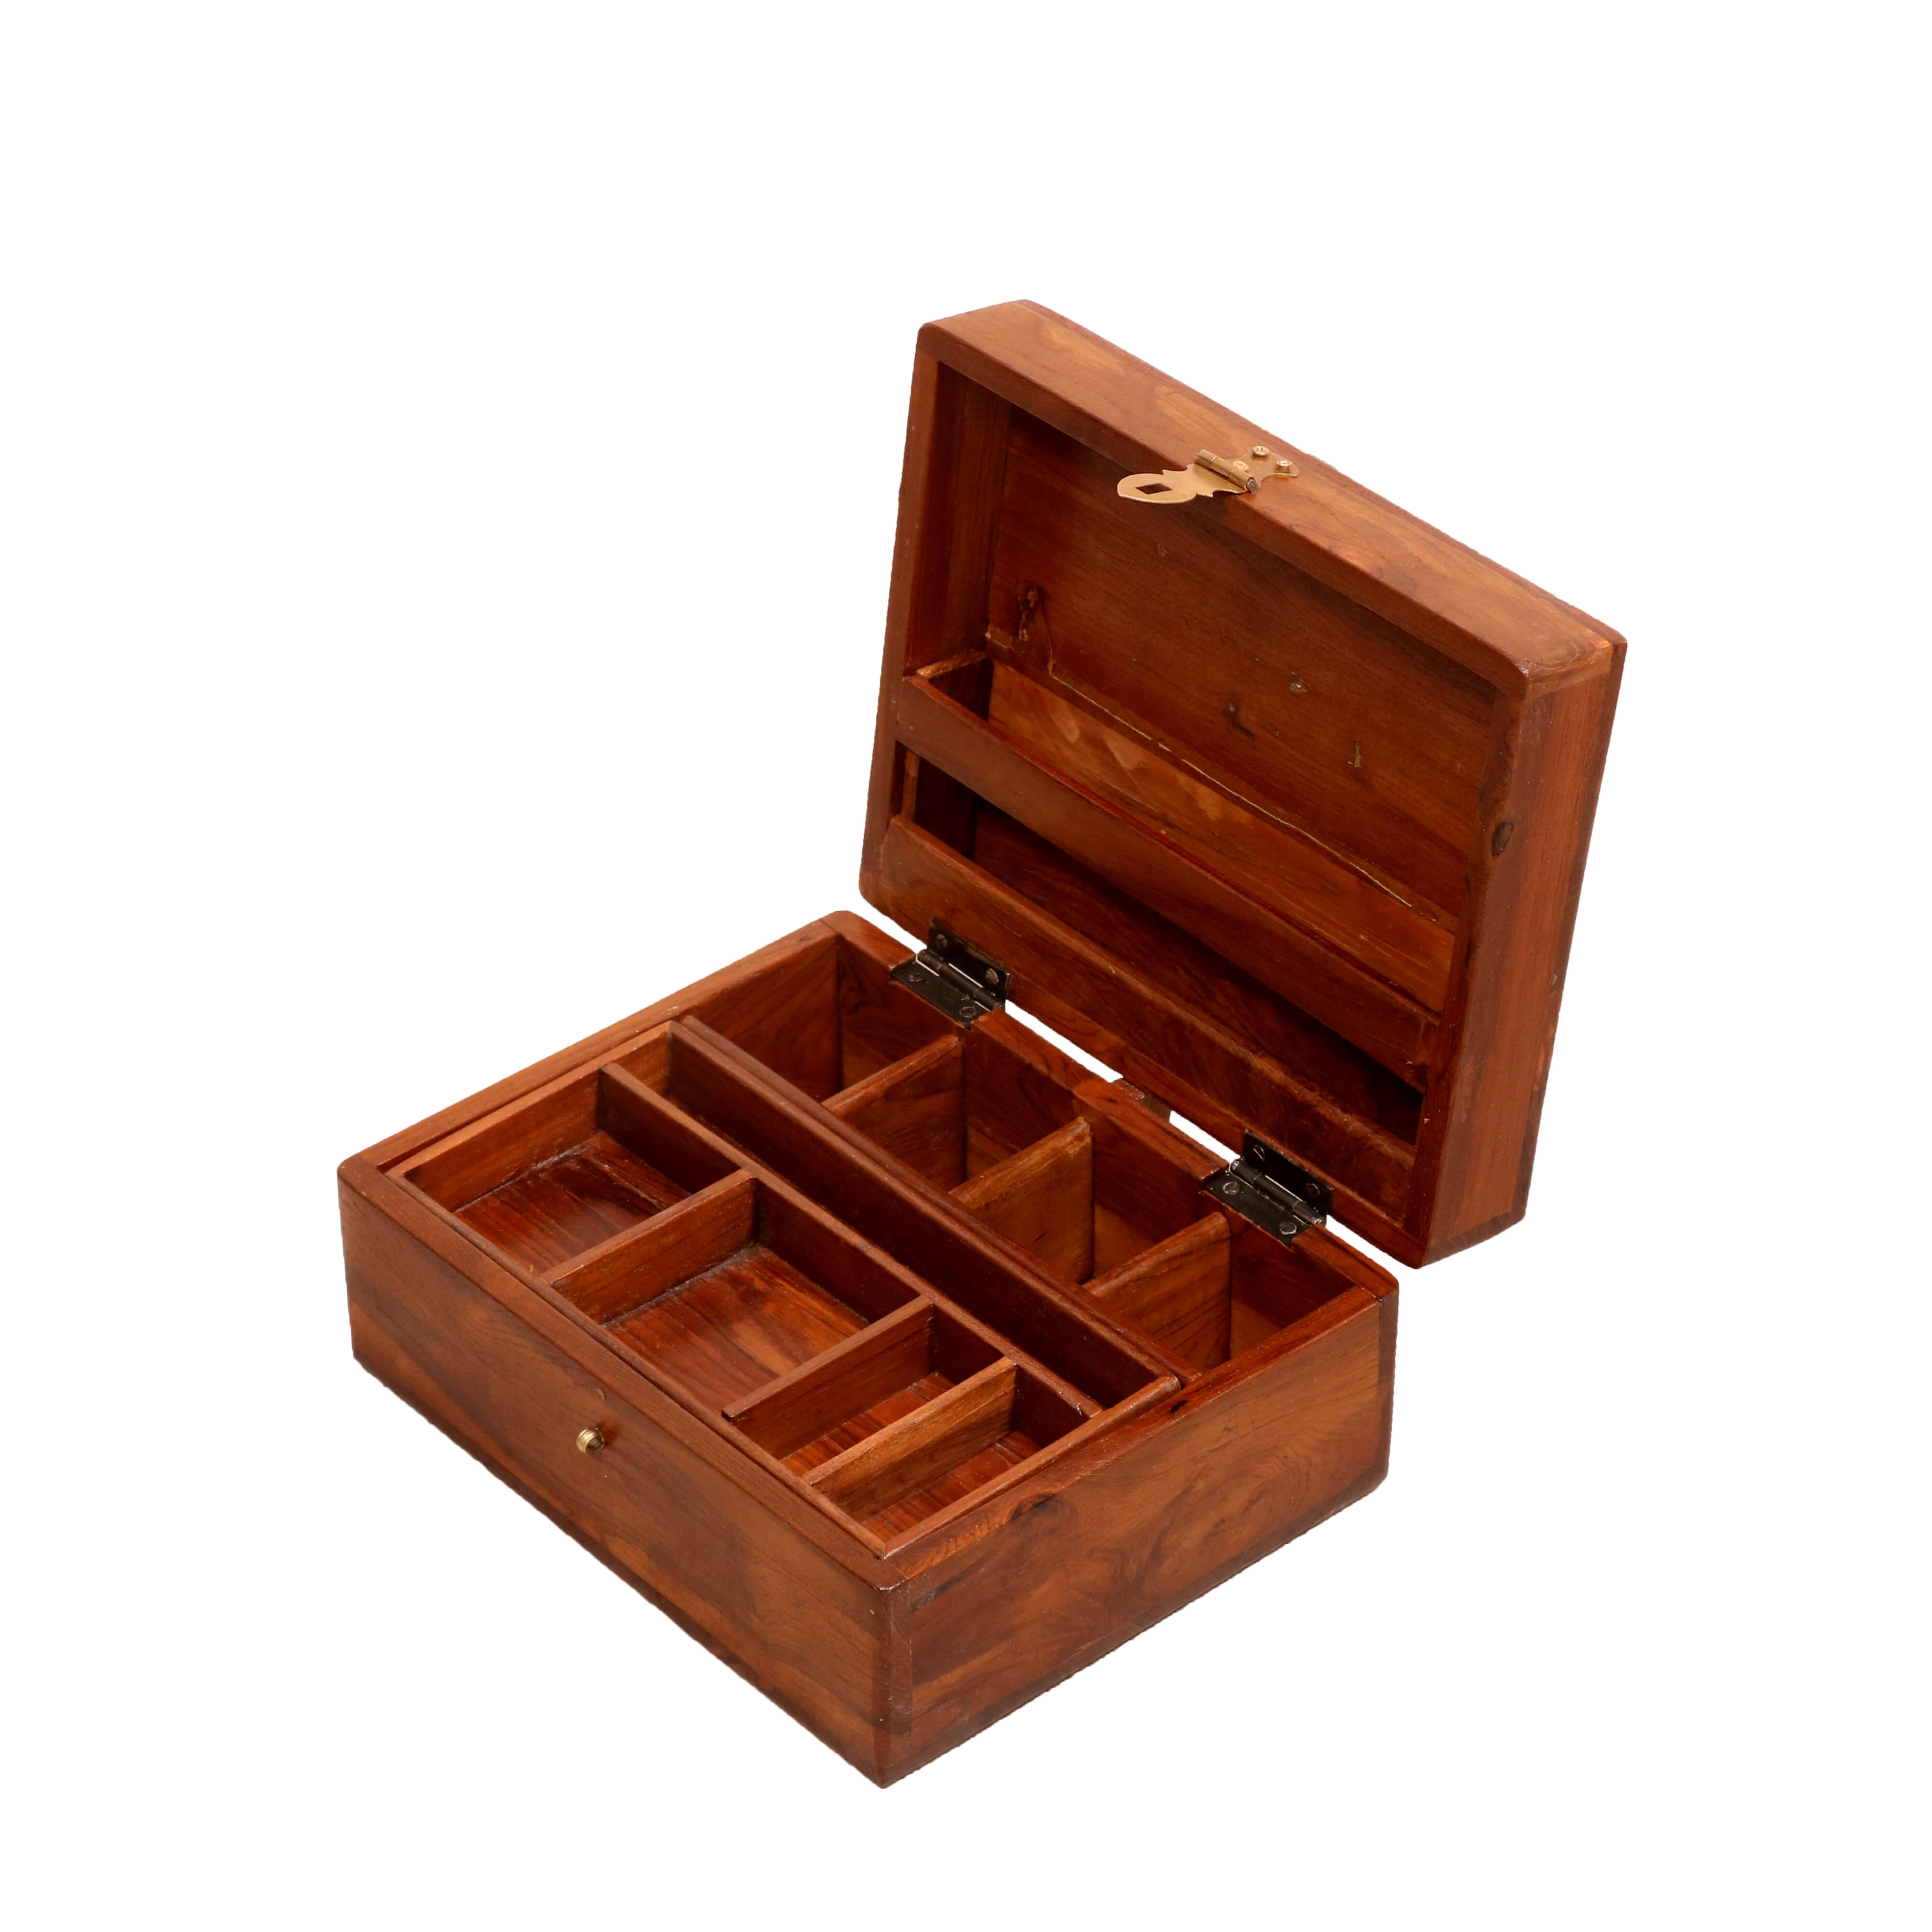 Two-compartment Jewellery Box Wooden Box